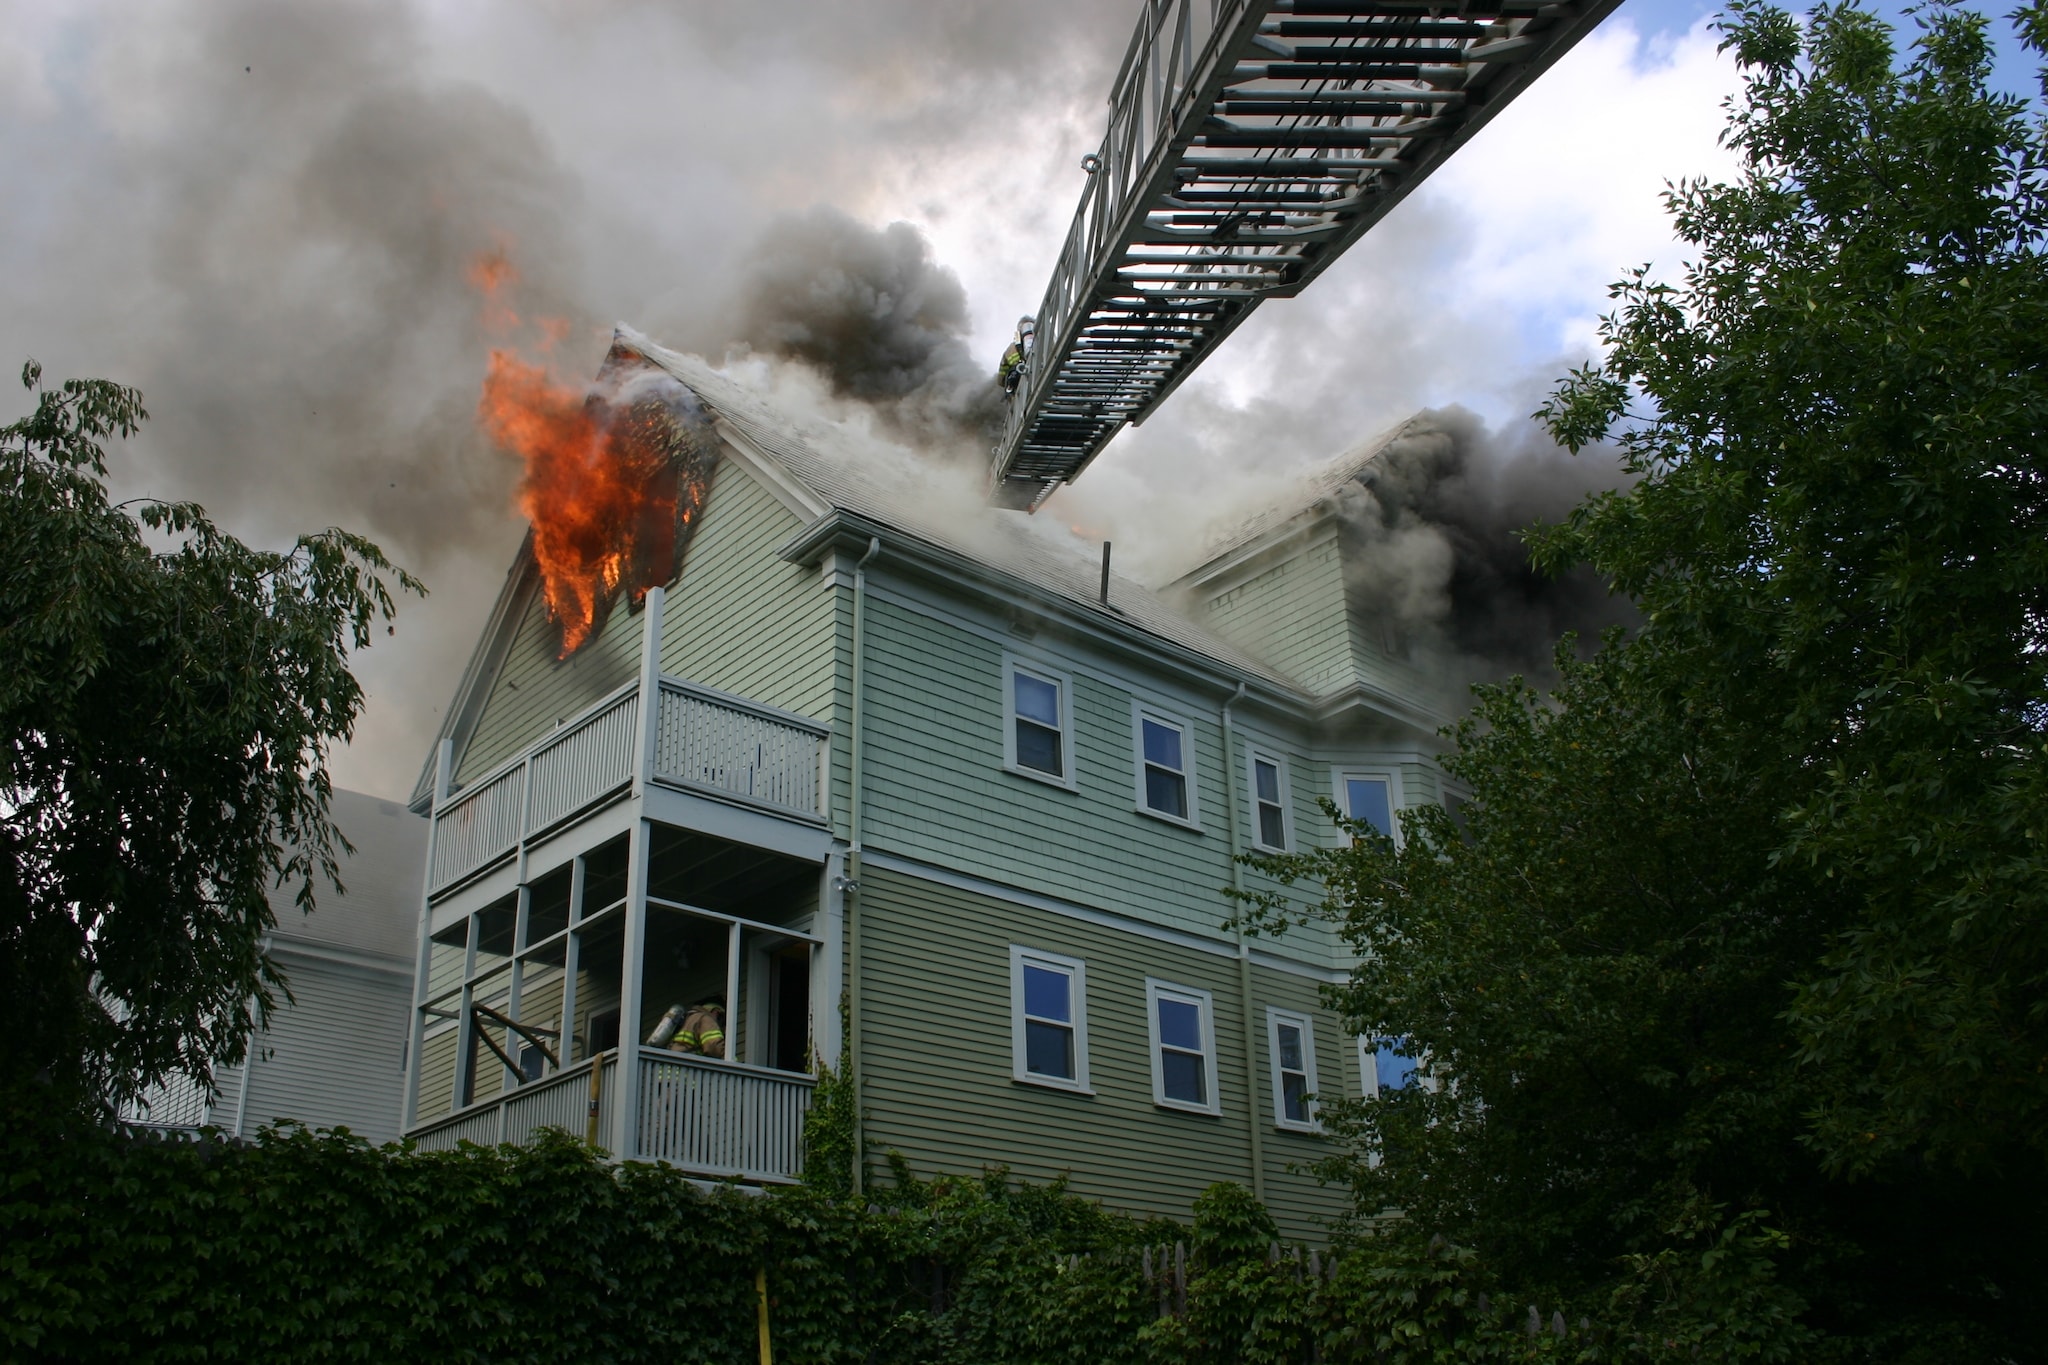 A Massachusetts house fire resulting from the use of highly flammable floor finishing products. Photo by Dean Razzaboni.